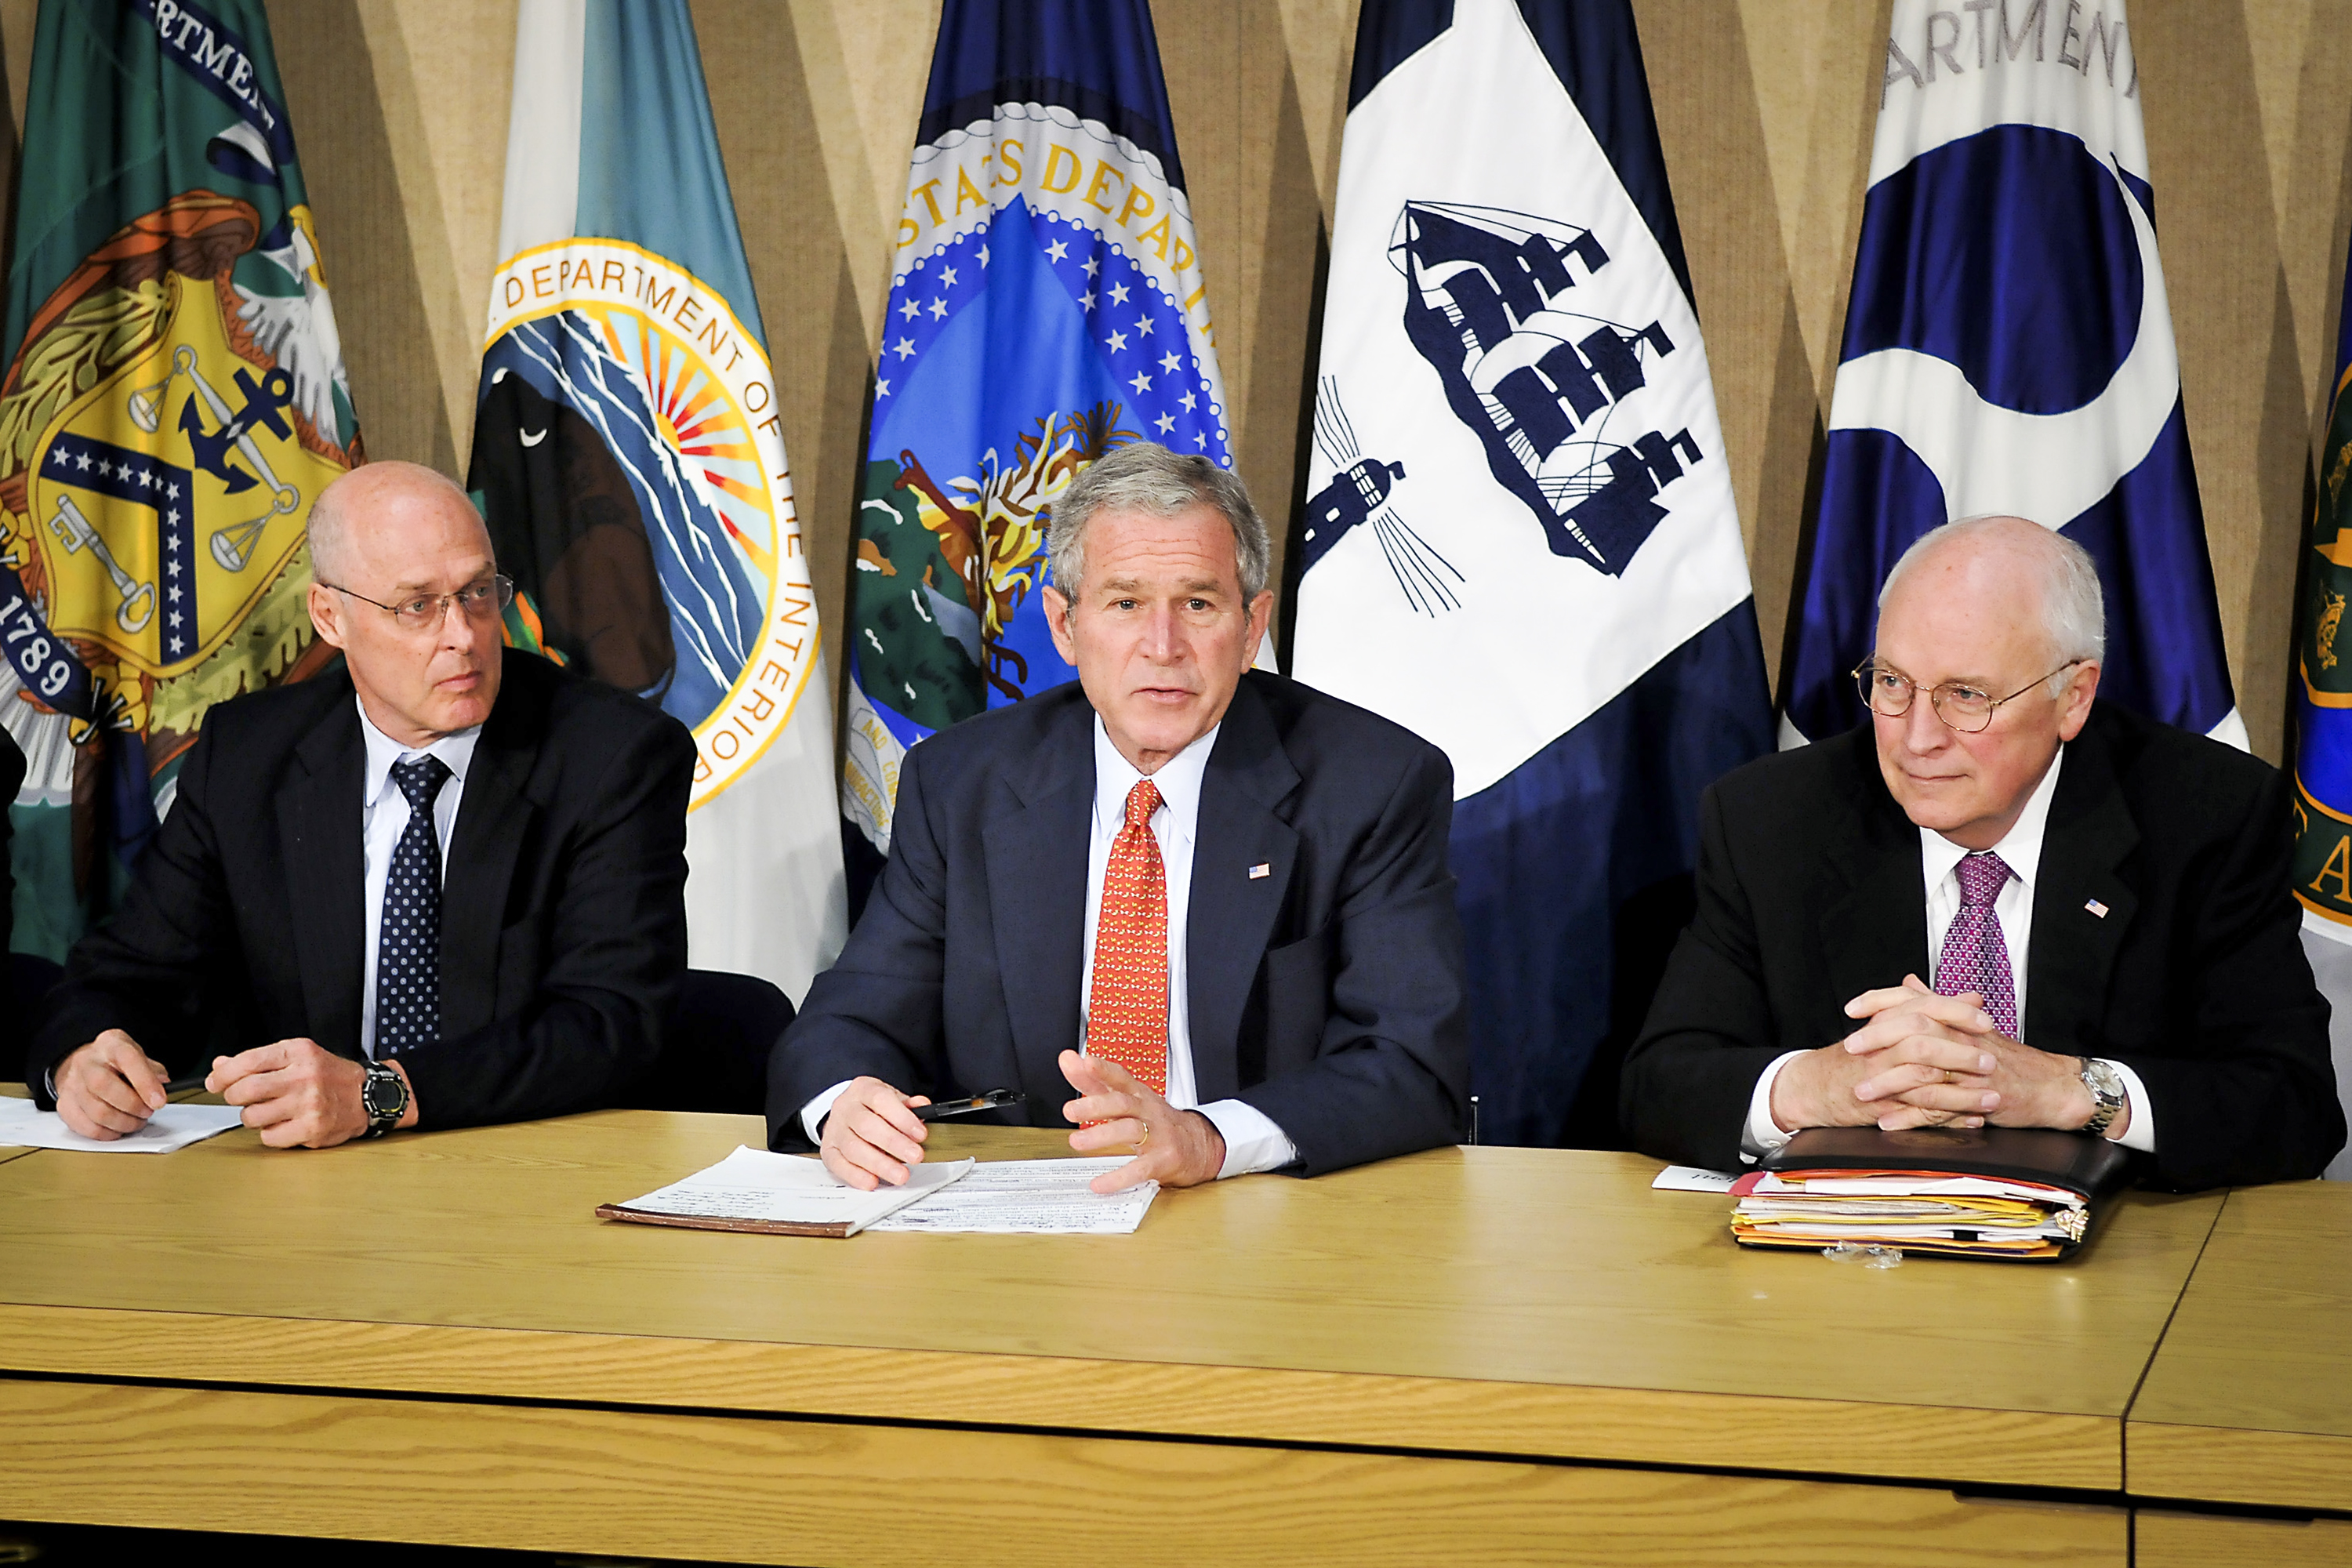 Three politicians sitting in a row at a table in front of multiple flags.